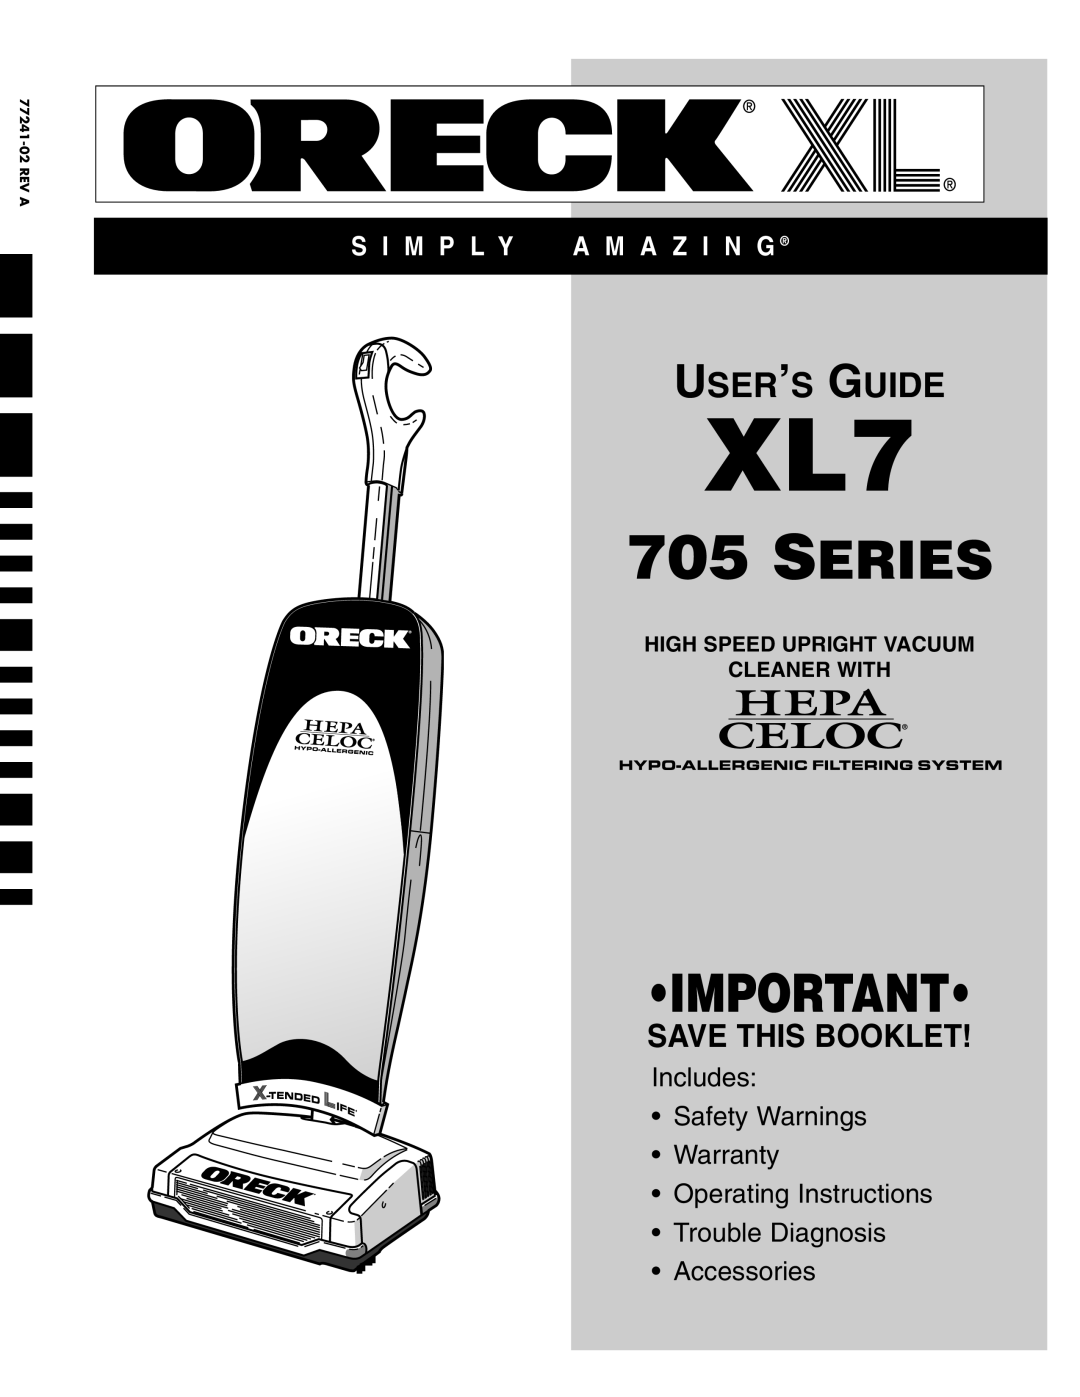 Oreck XL7 705 SERIES warranty High Speed Upright Vacuum Cleaner With, Series, User’S Guide, Save This Booklet, Accessories 